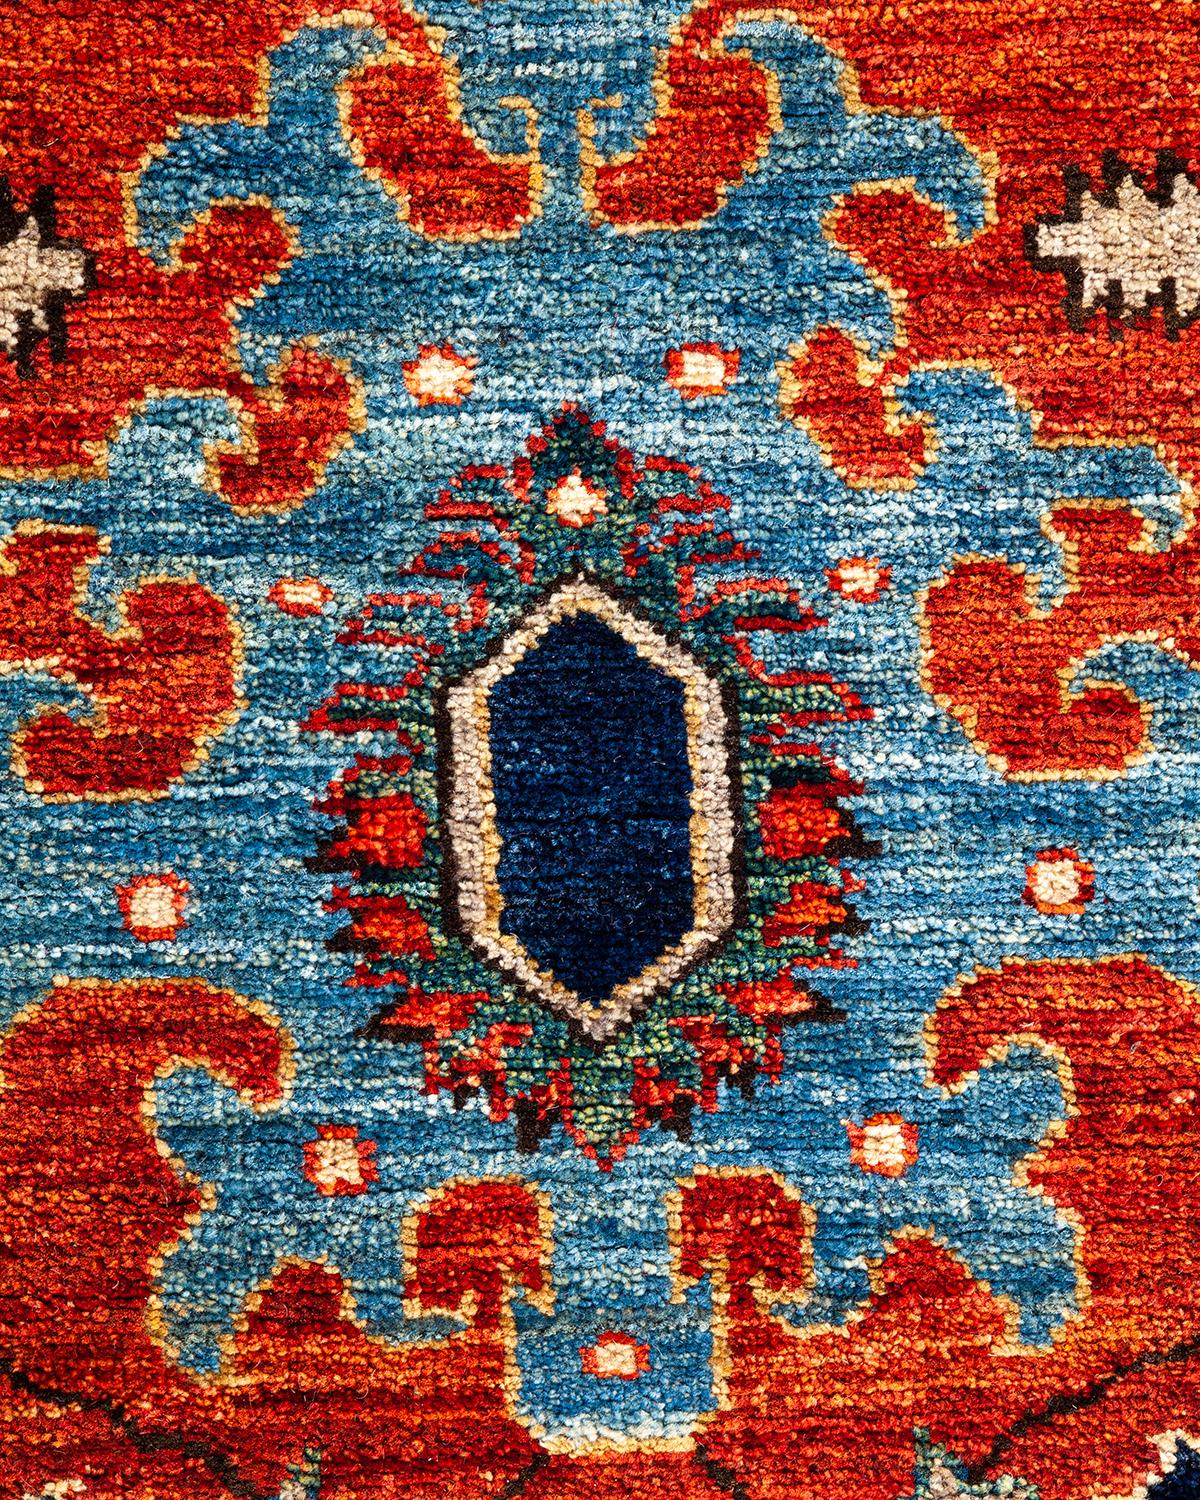 Wool Serapi, One-of-a-kind Hand-Knotted Runner Rug, Orange For Sale